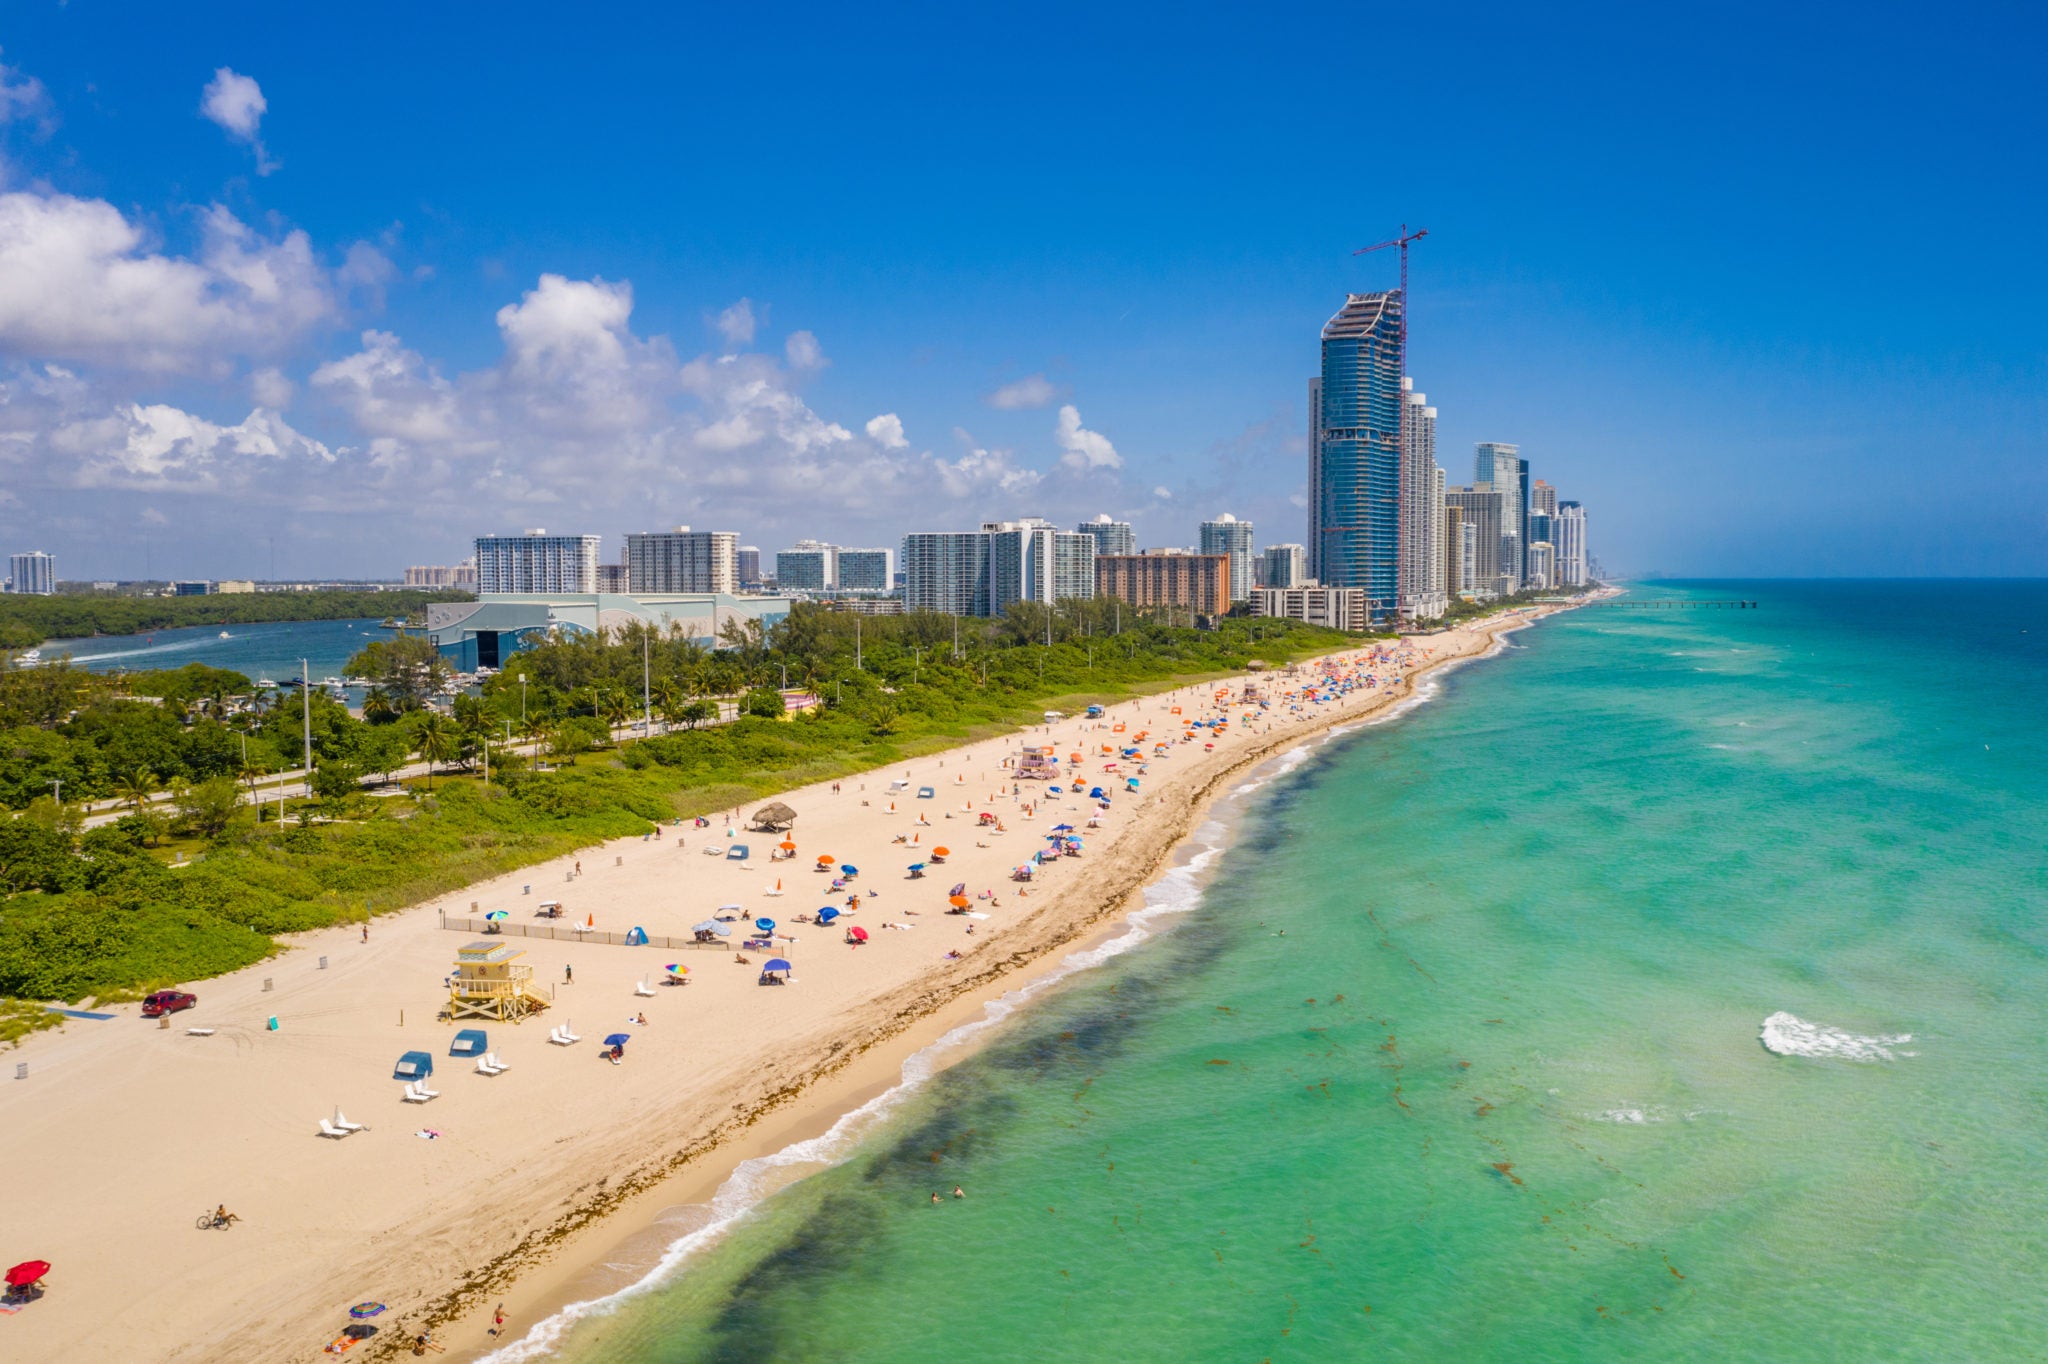 30 Best Things To Do In Miami Miami Beach 2021